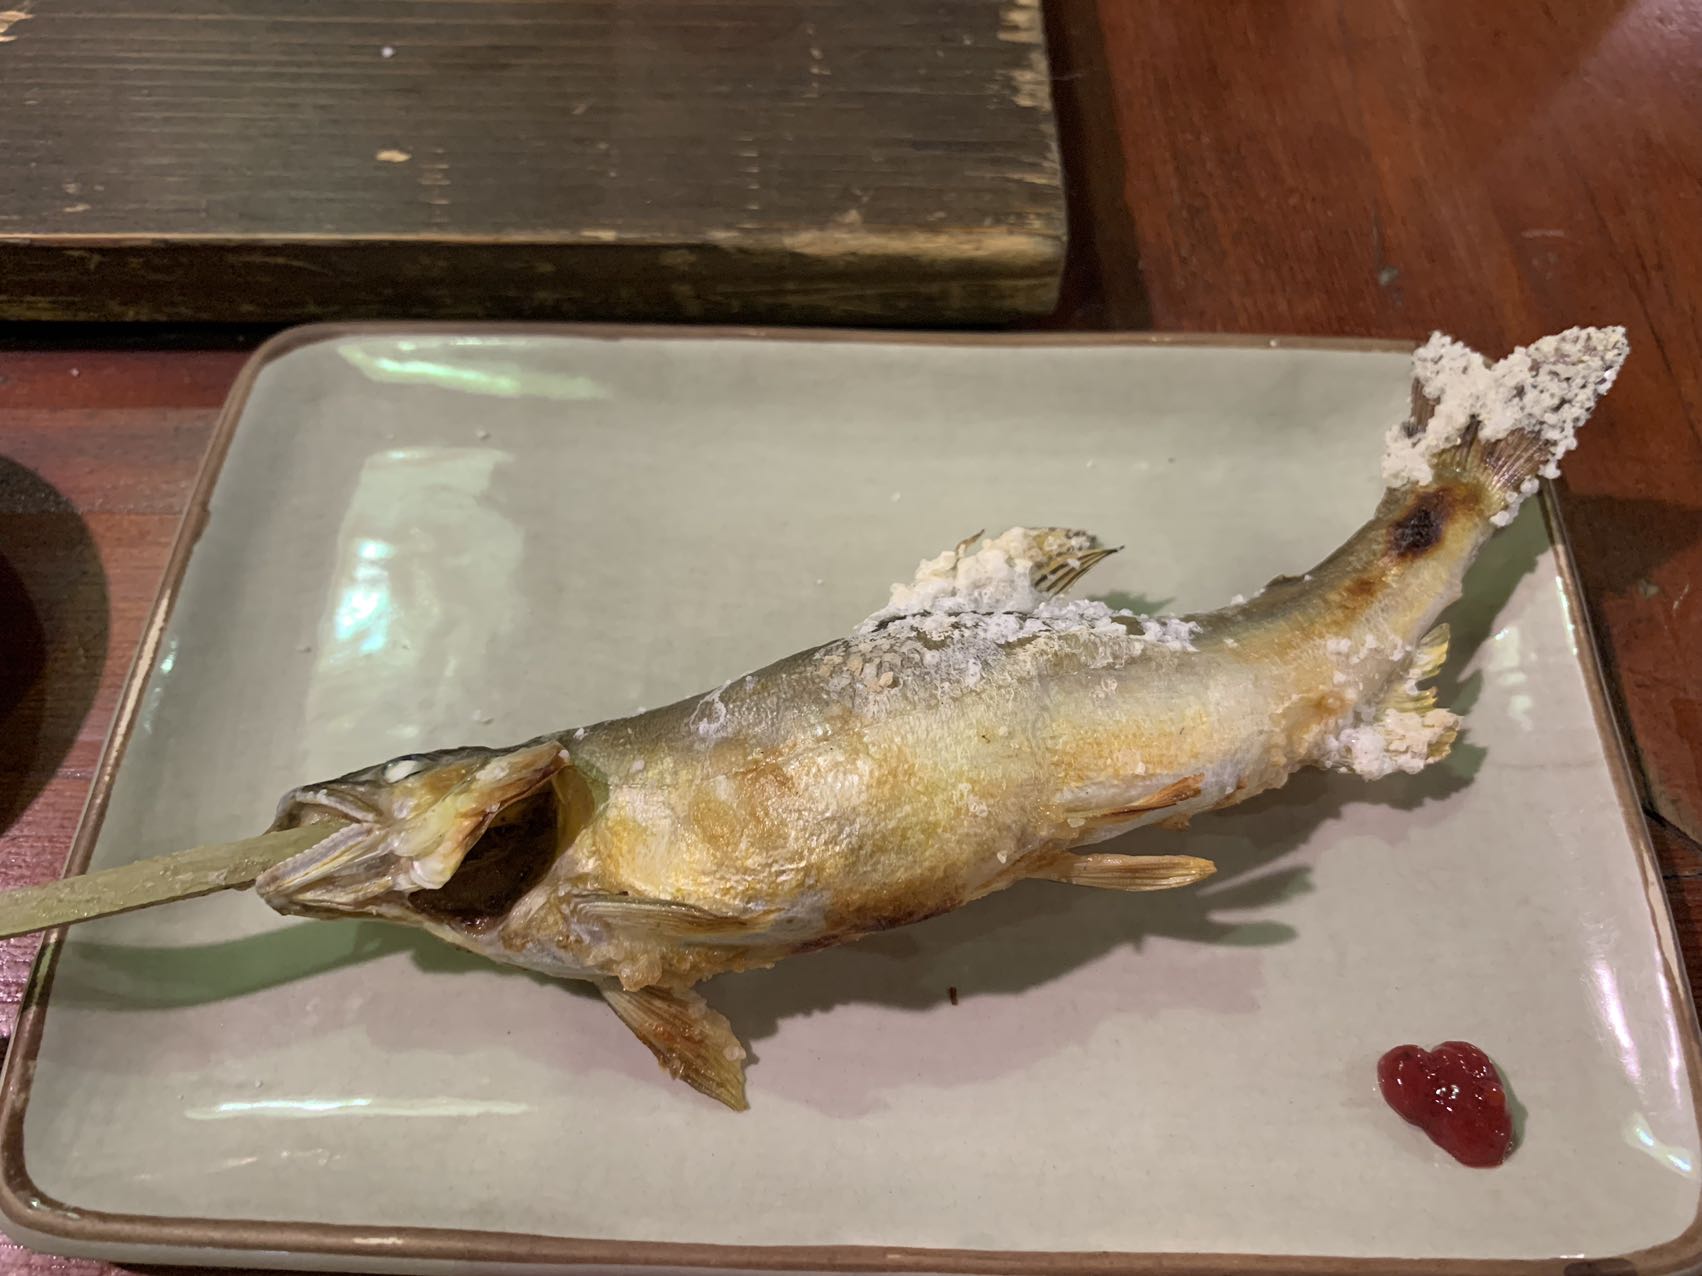 The salt-grilled sweetfish, ayu no shioyaki, are skewered on a curve to make them appear as though they are still swimming against the current.